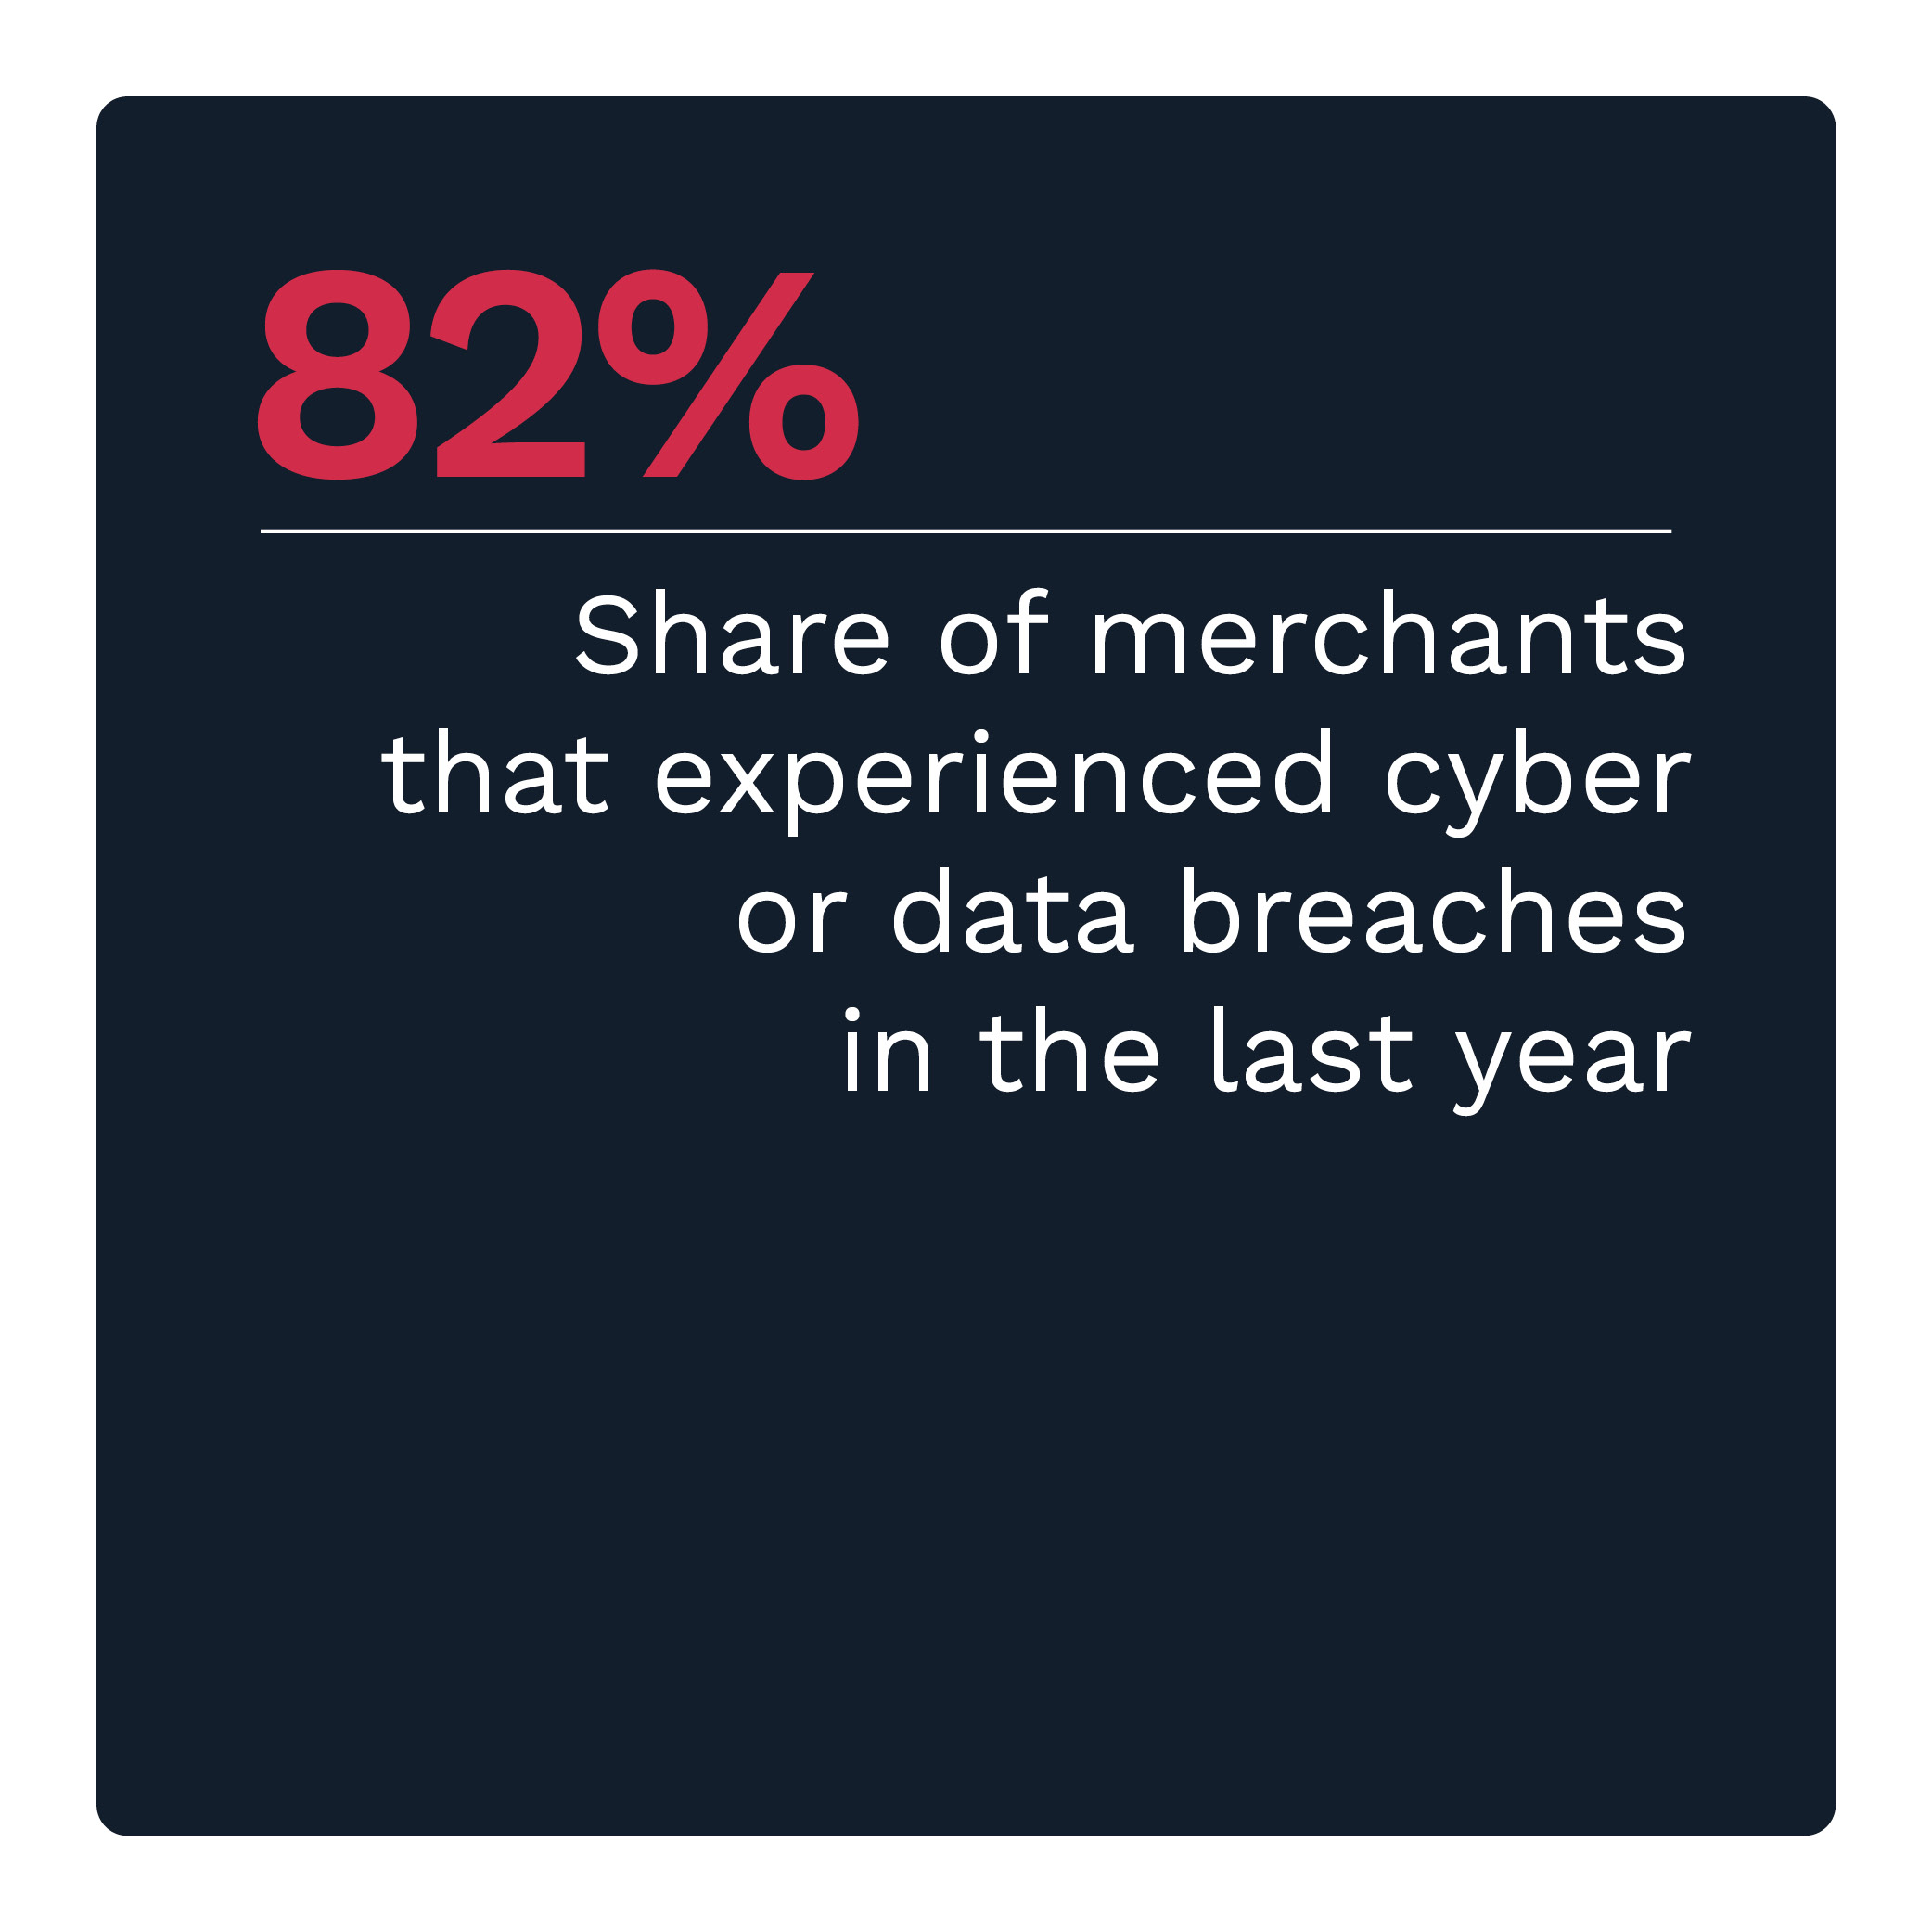 82%: Share of merchants that experienced cyber or data breaches in the last year